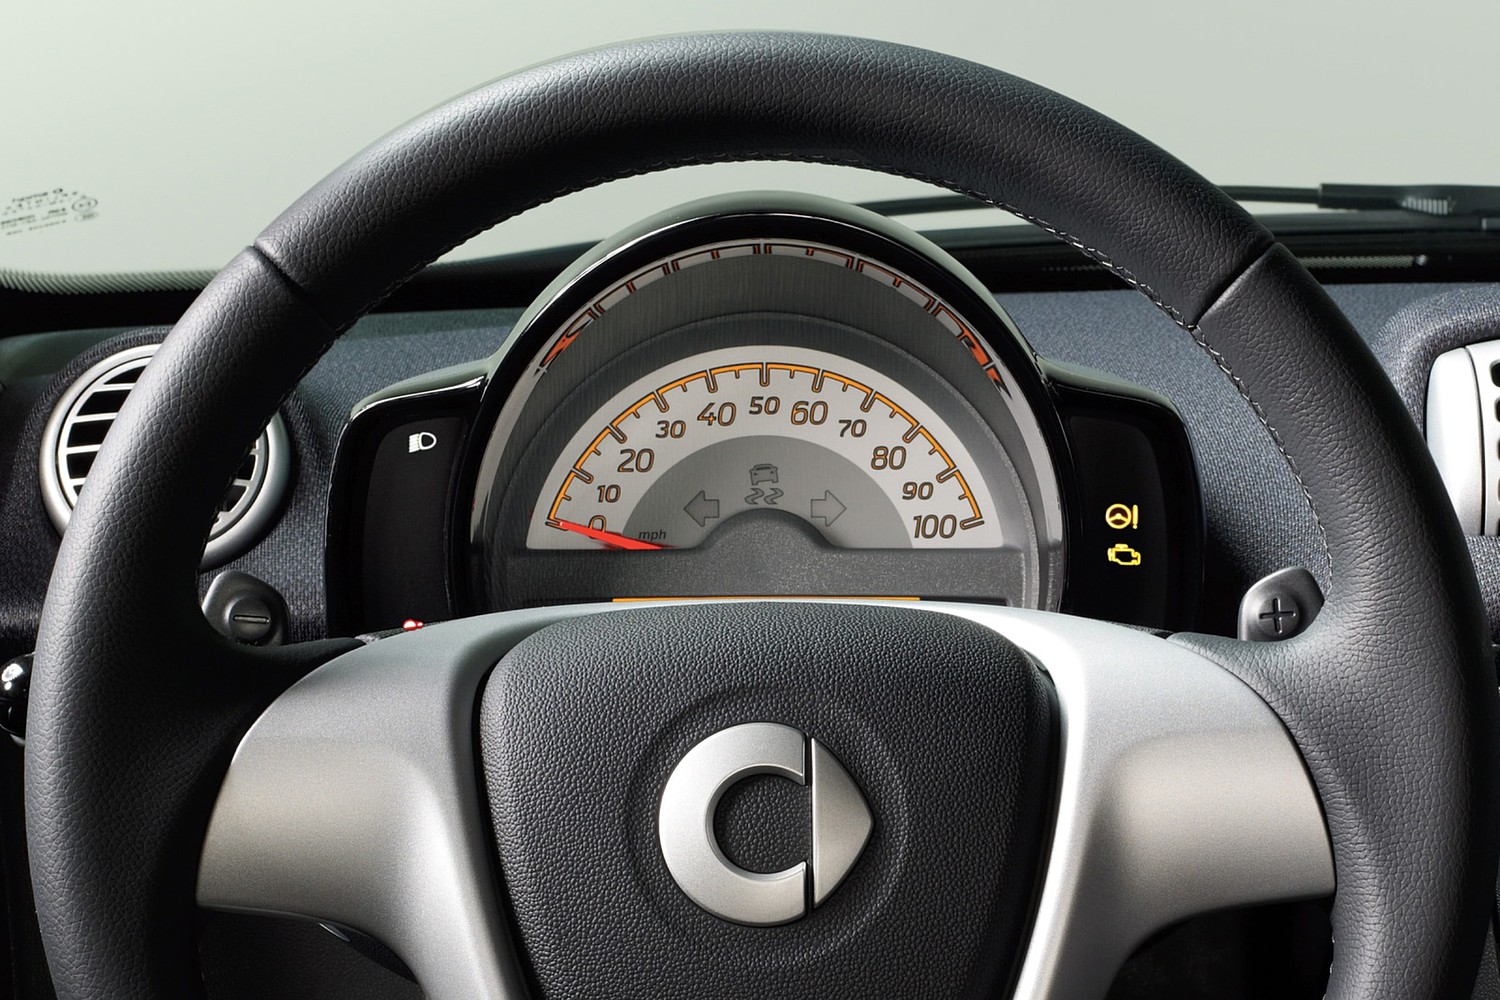 smart fortwo passion coupe 2dr Hatchback Gauge Cluster (2013 model year shown)